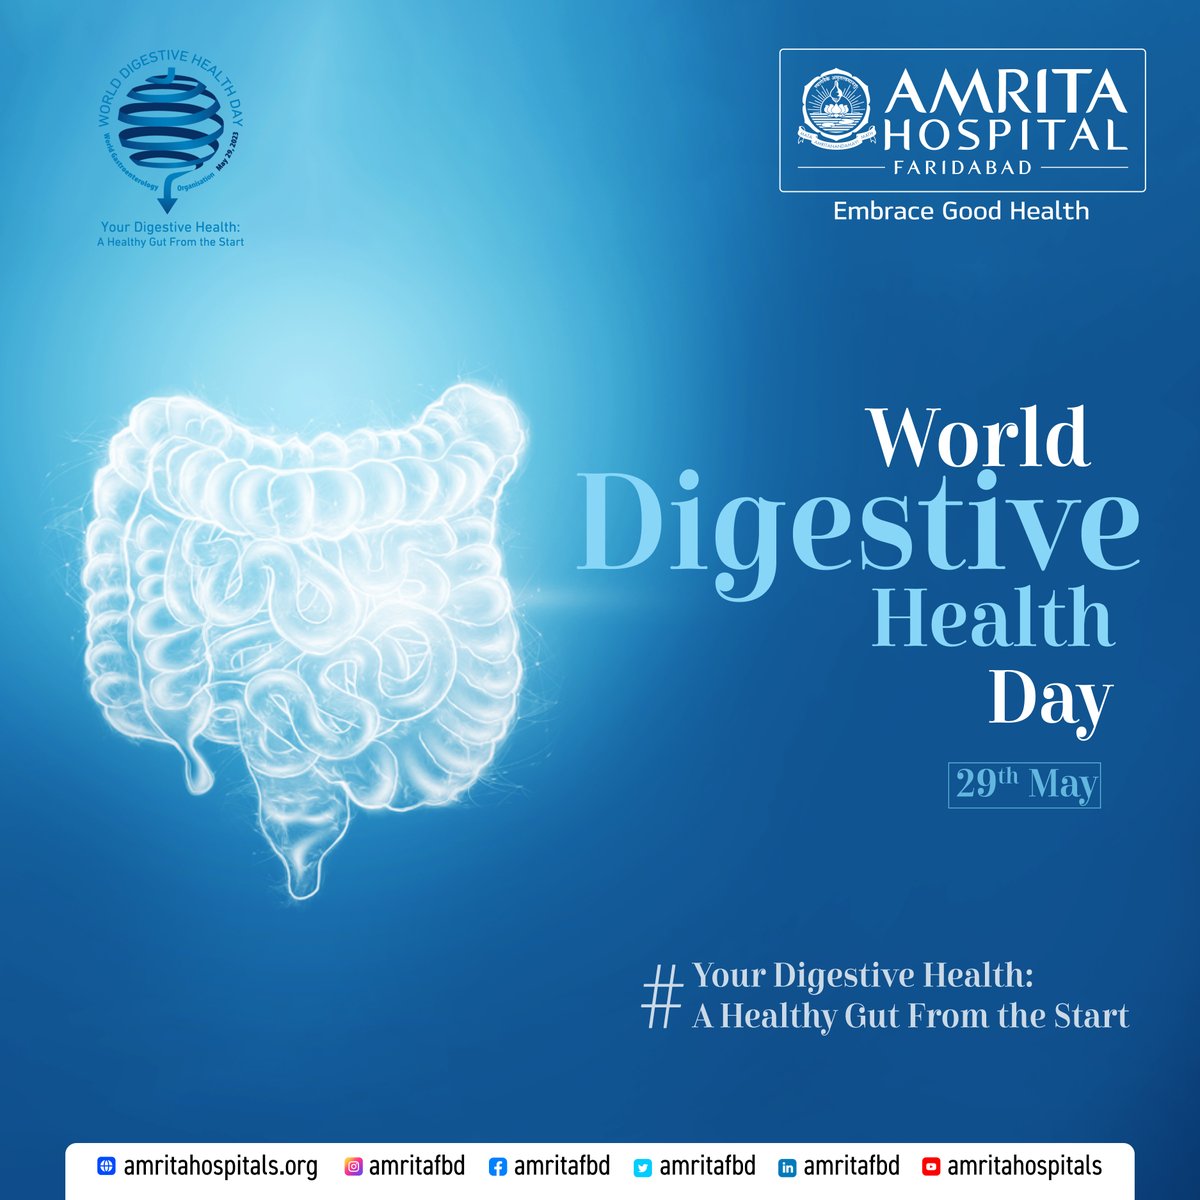 #WorldDigestiveHealthDay is observed worldwide annually on May 29th to increase understanding about different digestive illnesses & disorders.

For appointments call us at 0129-2851234

#WDHD #DigestiveHealth #EmbraceGoodHealth #AmritaHospitalFaridabad #AmritaHospital